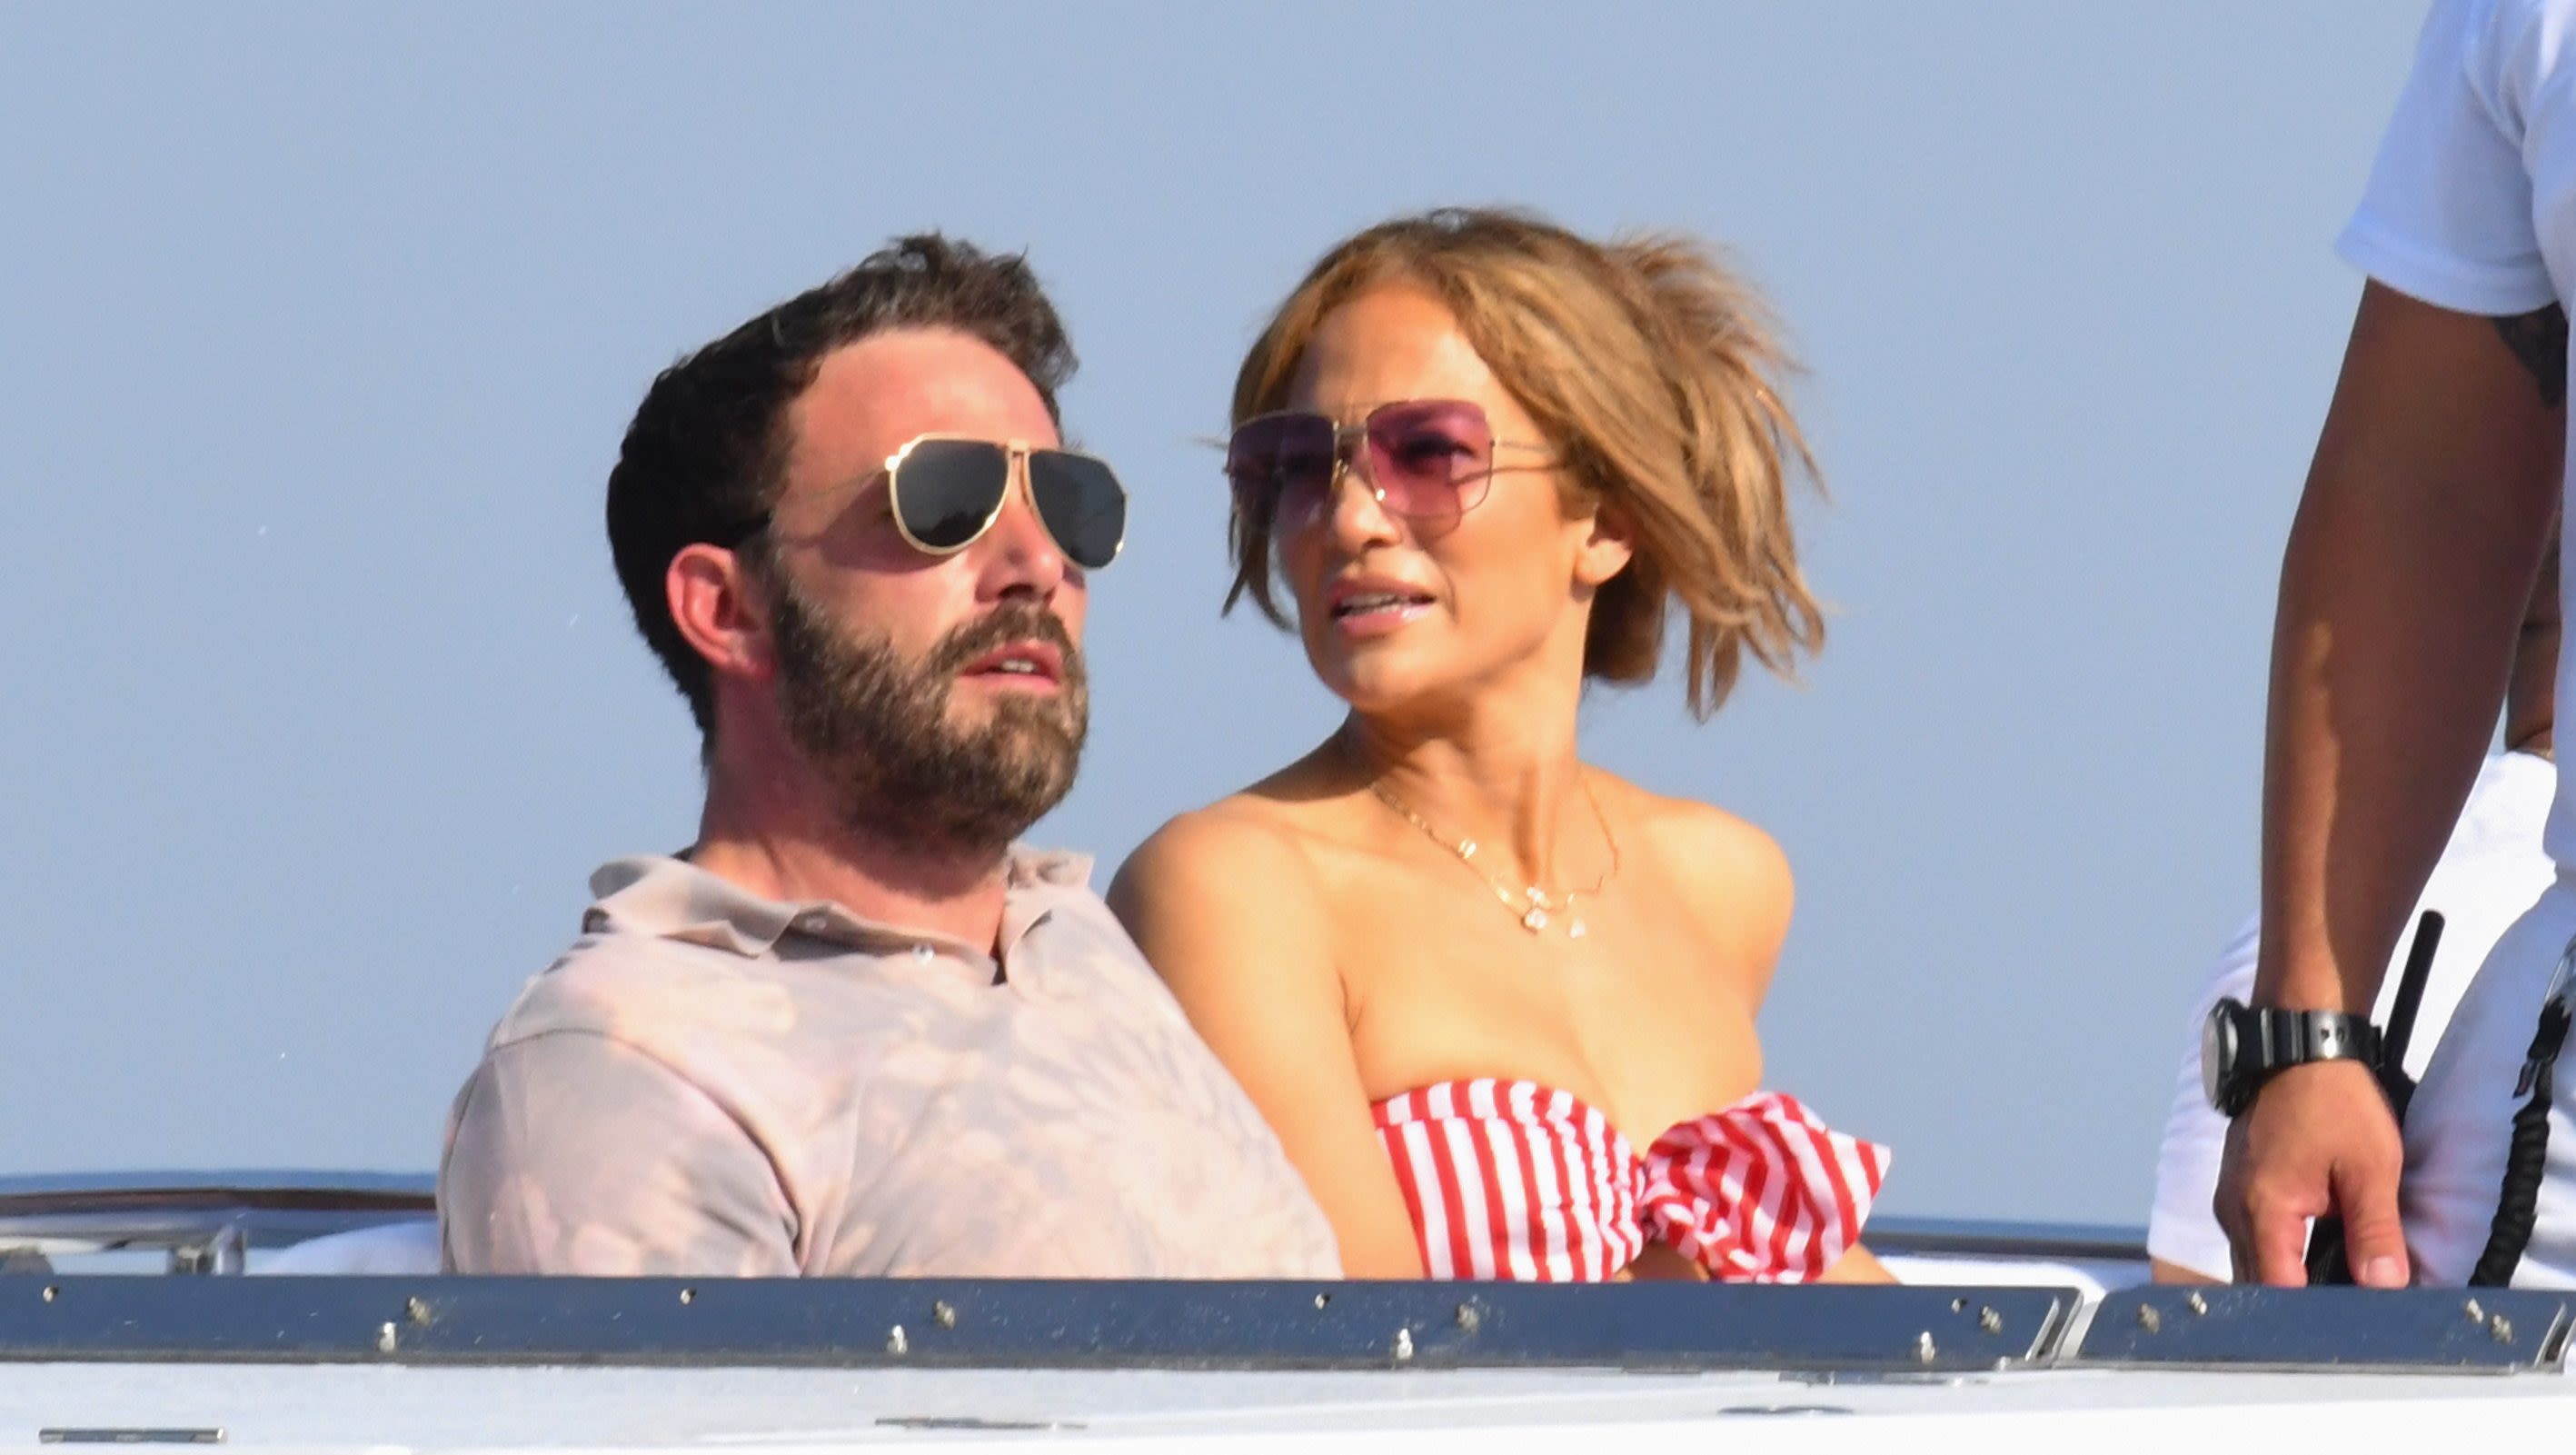 Ben Affleck ‘Depressed’ Over Jennifer Lopez Relationship Issues, Marriage Was ‘Drama All the Time’: Report